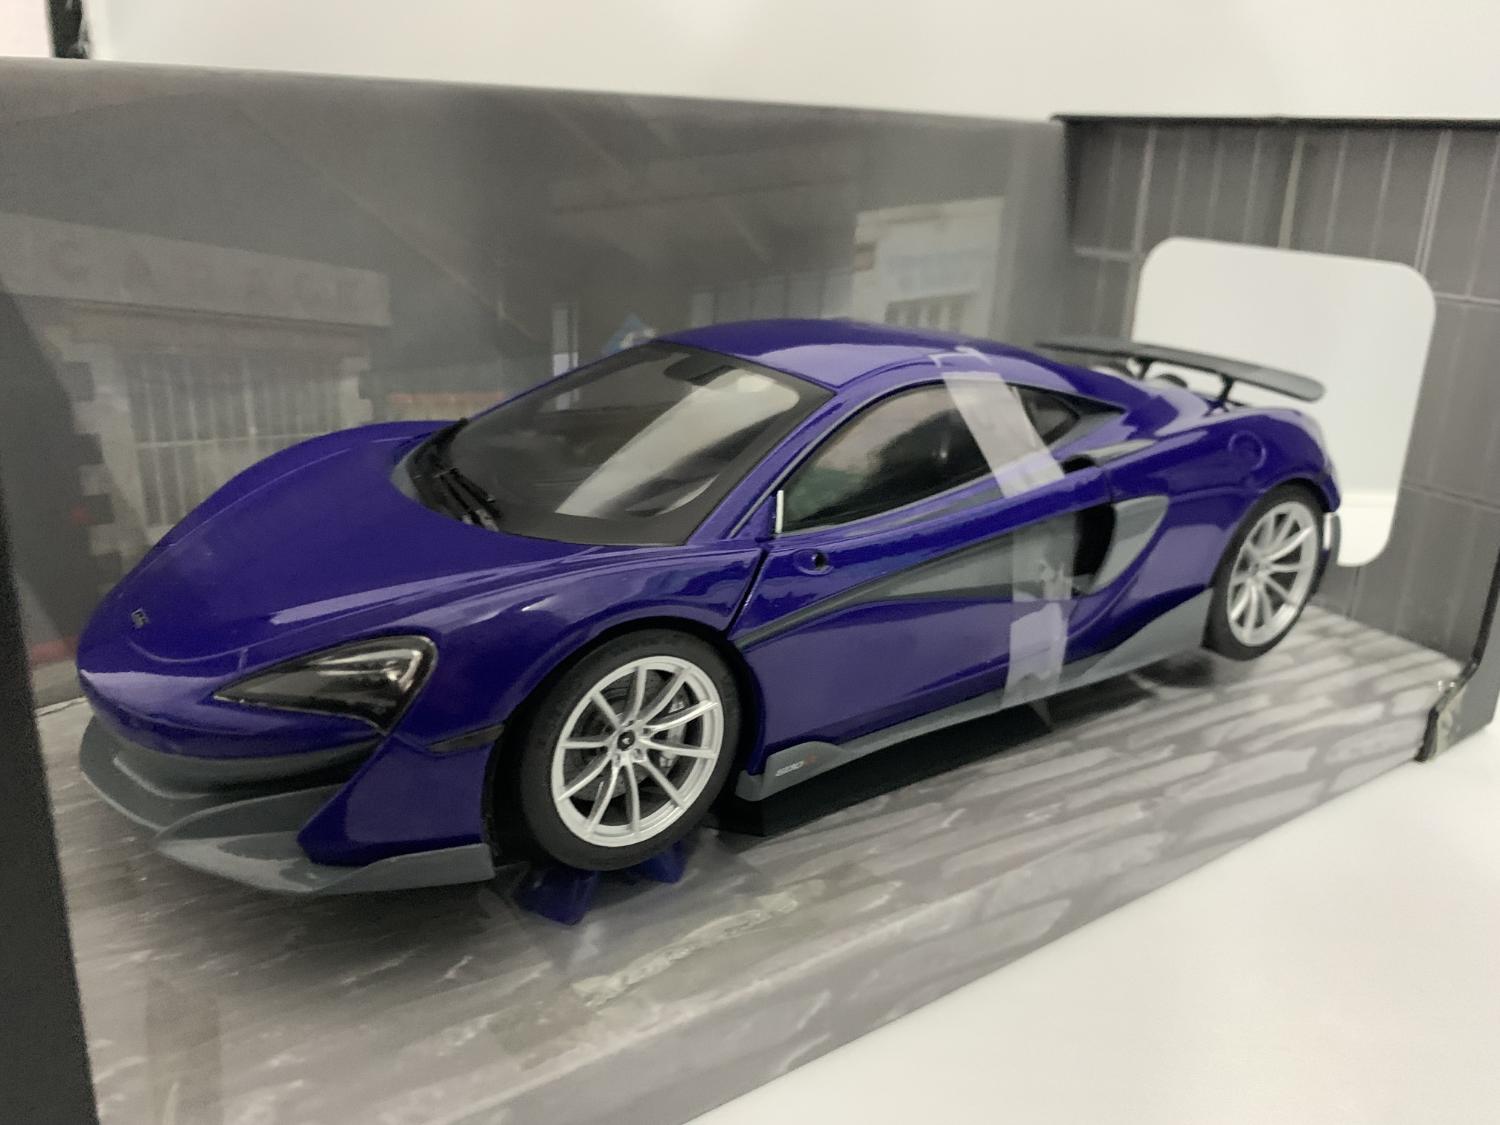 A very good representation of the McLaren 600LT decorated in lantana purple and grey with rear spoiler and silver wheels.